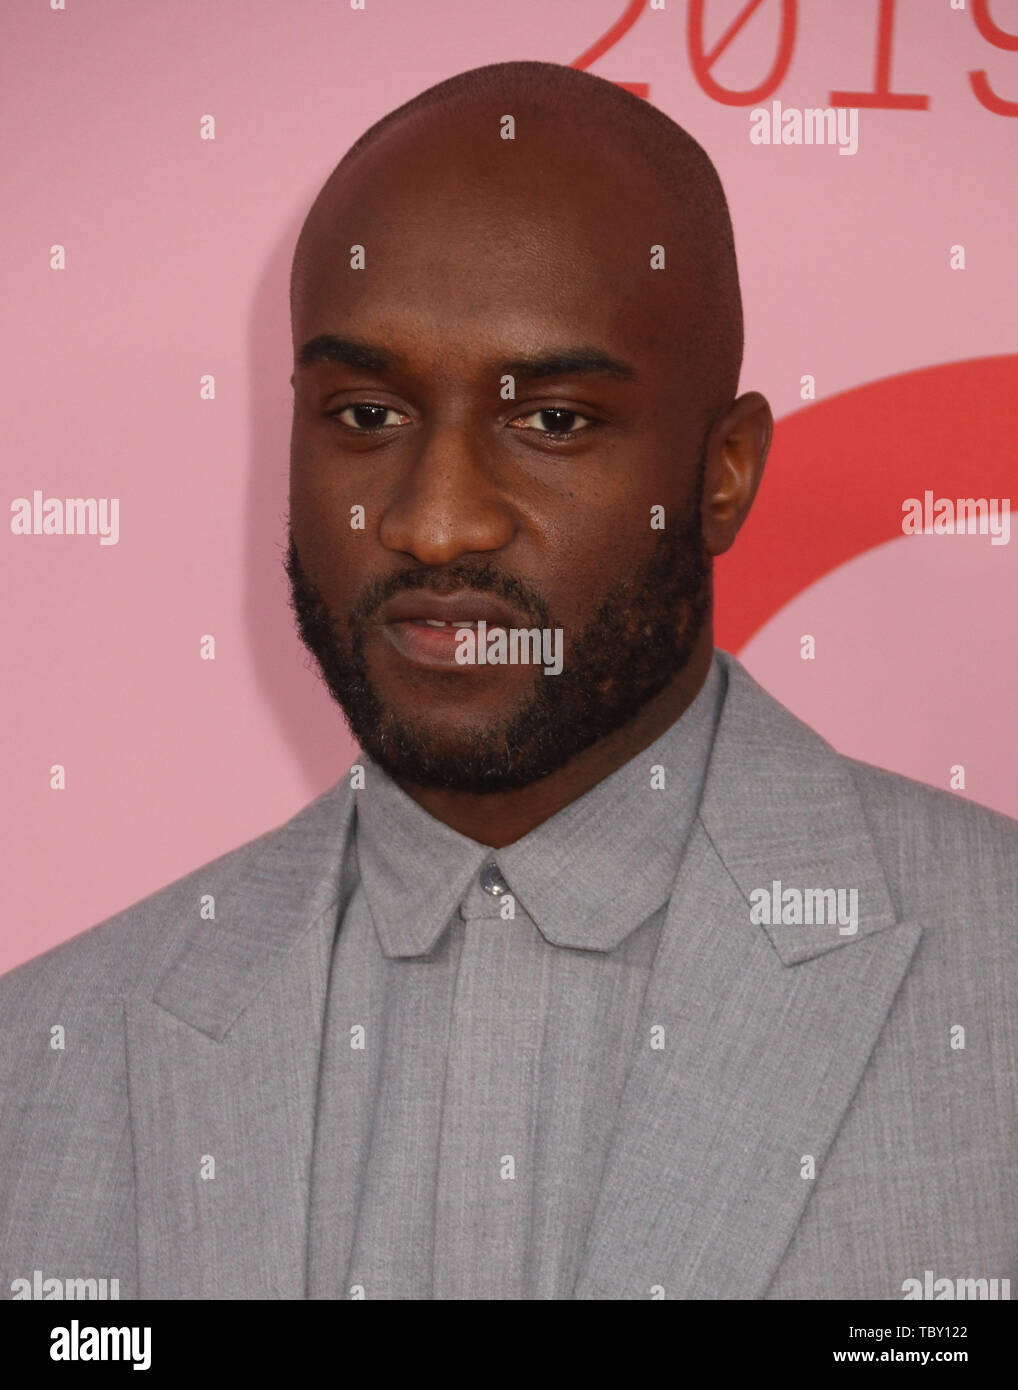 Model Presents Creation By Virgil Abloh Editorial Stock Photo - Stock Image